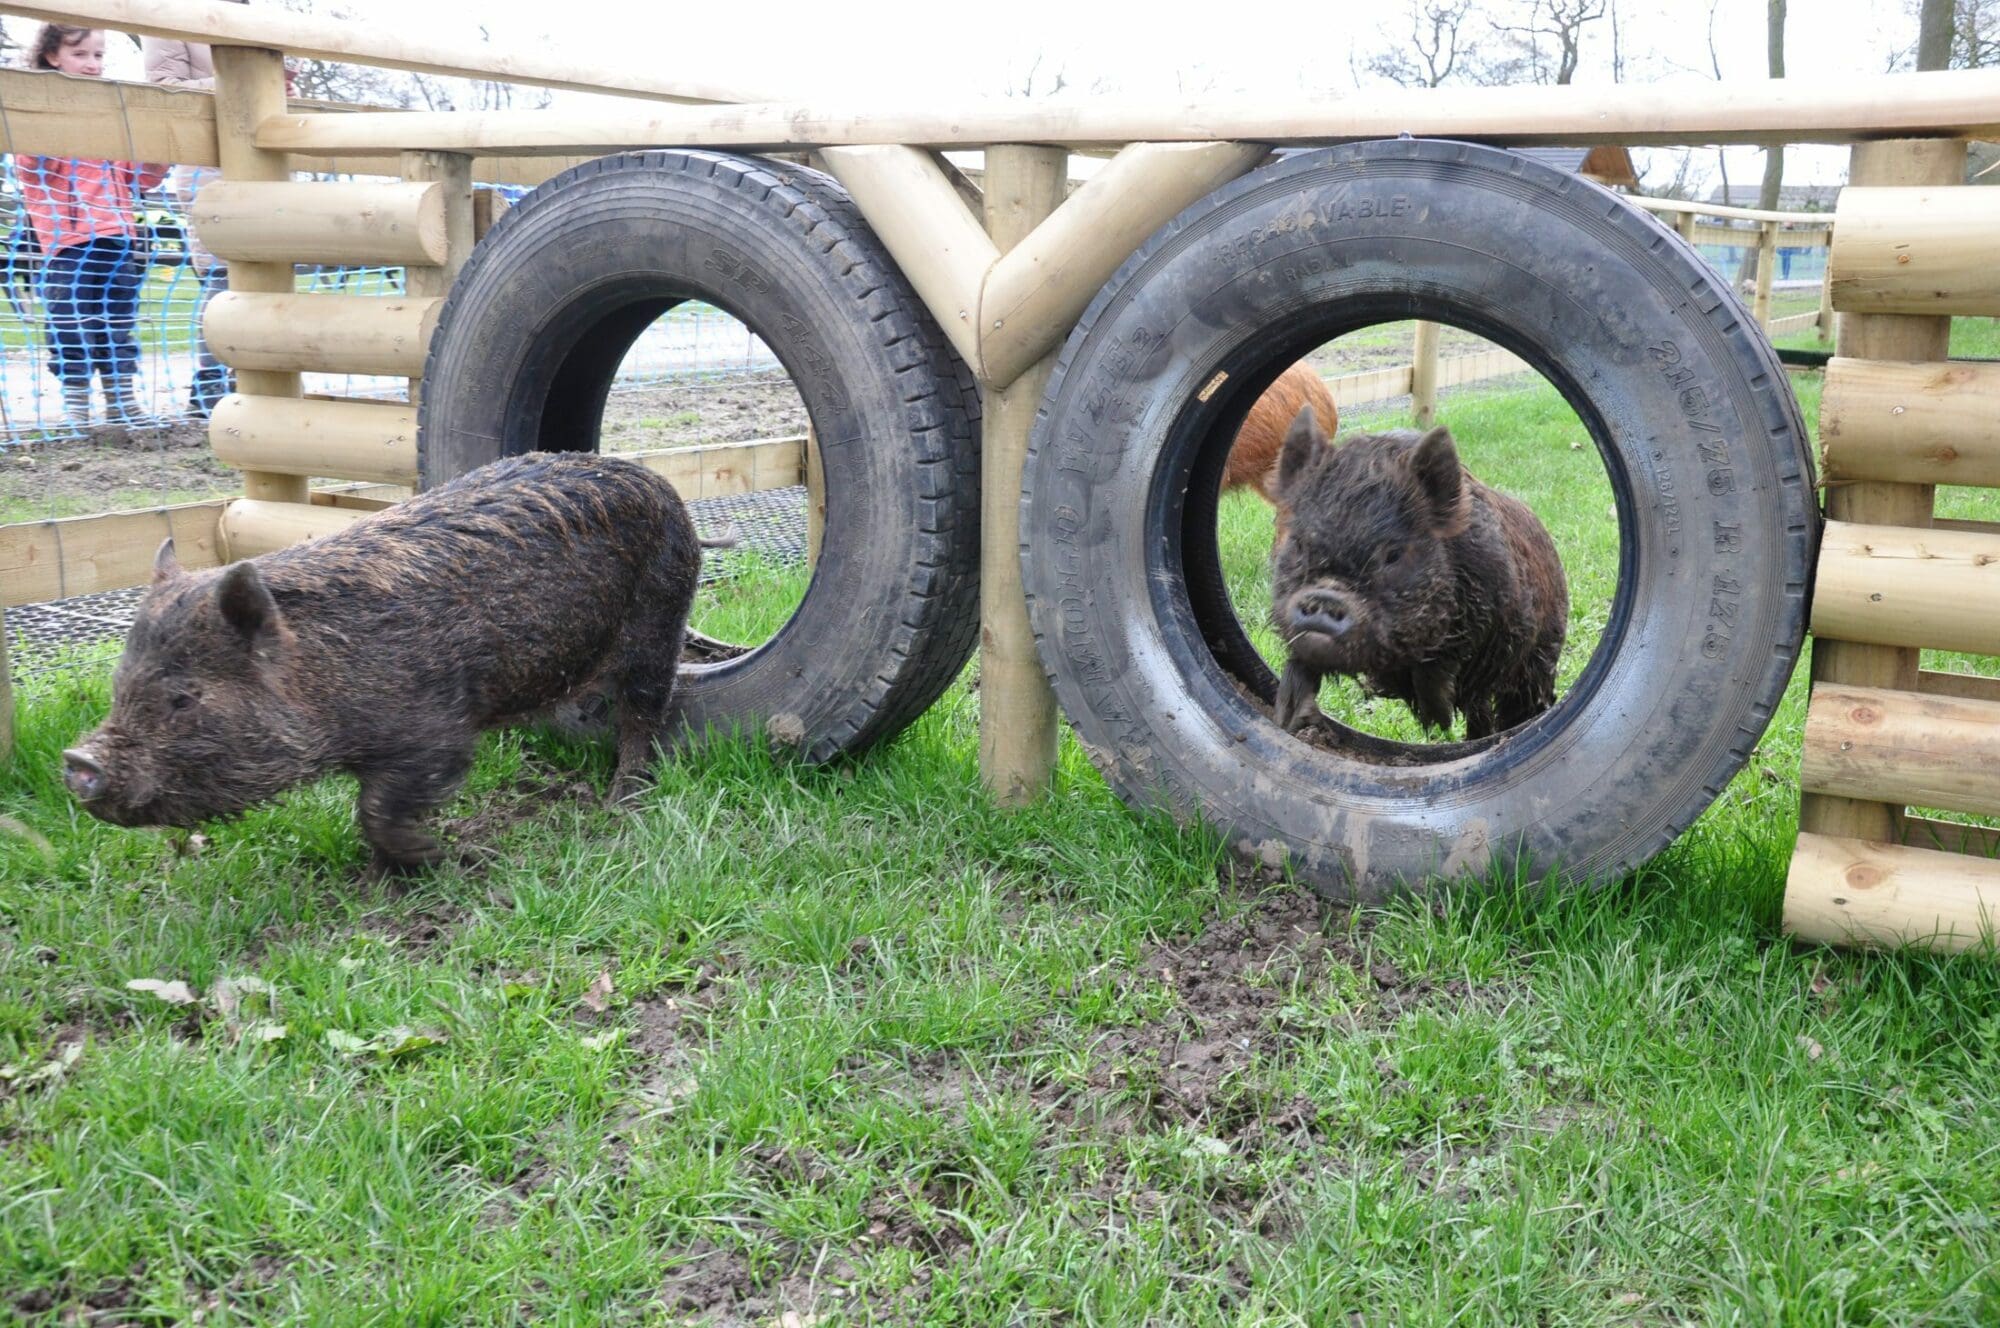 pigs jumping through tyres in a race